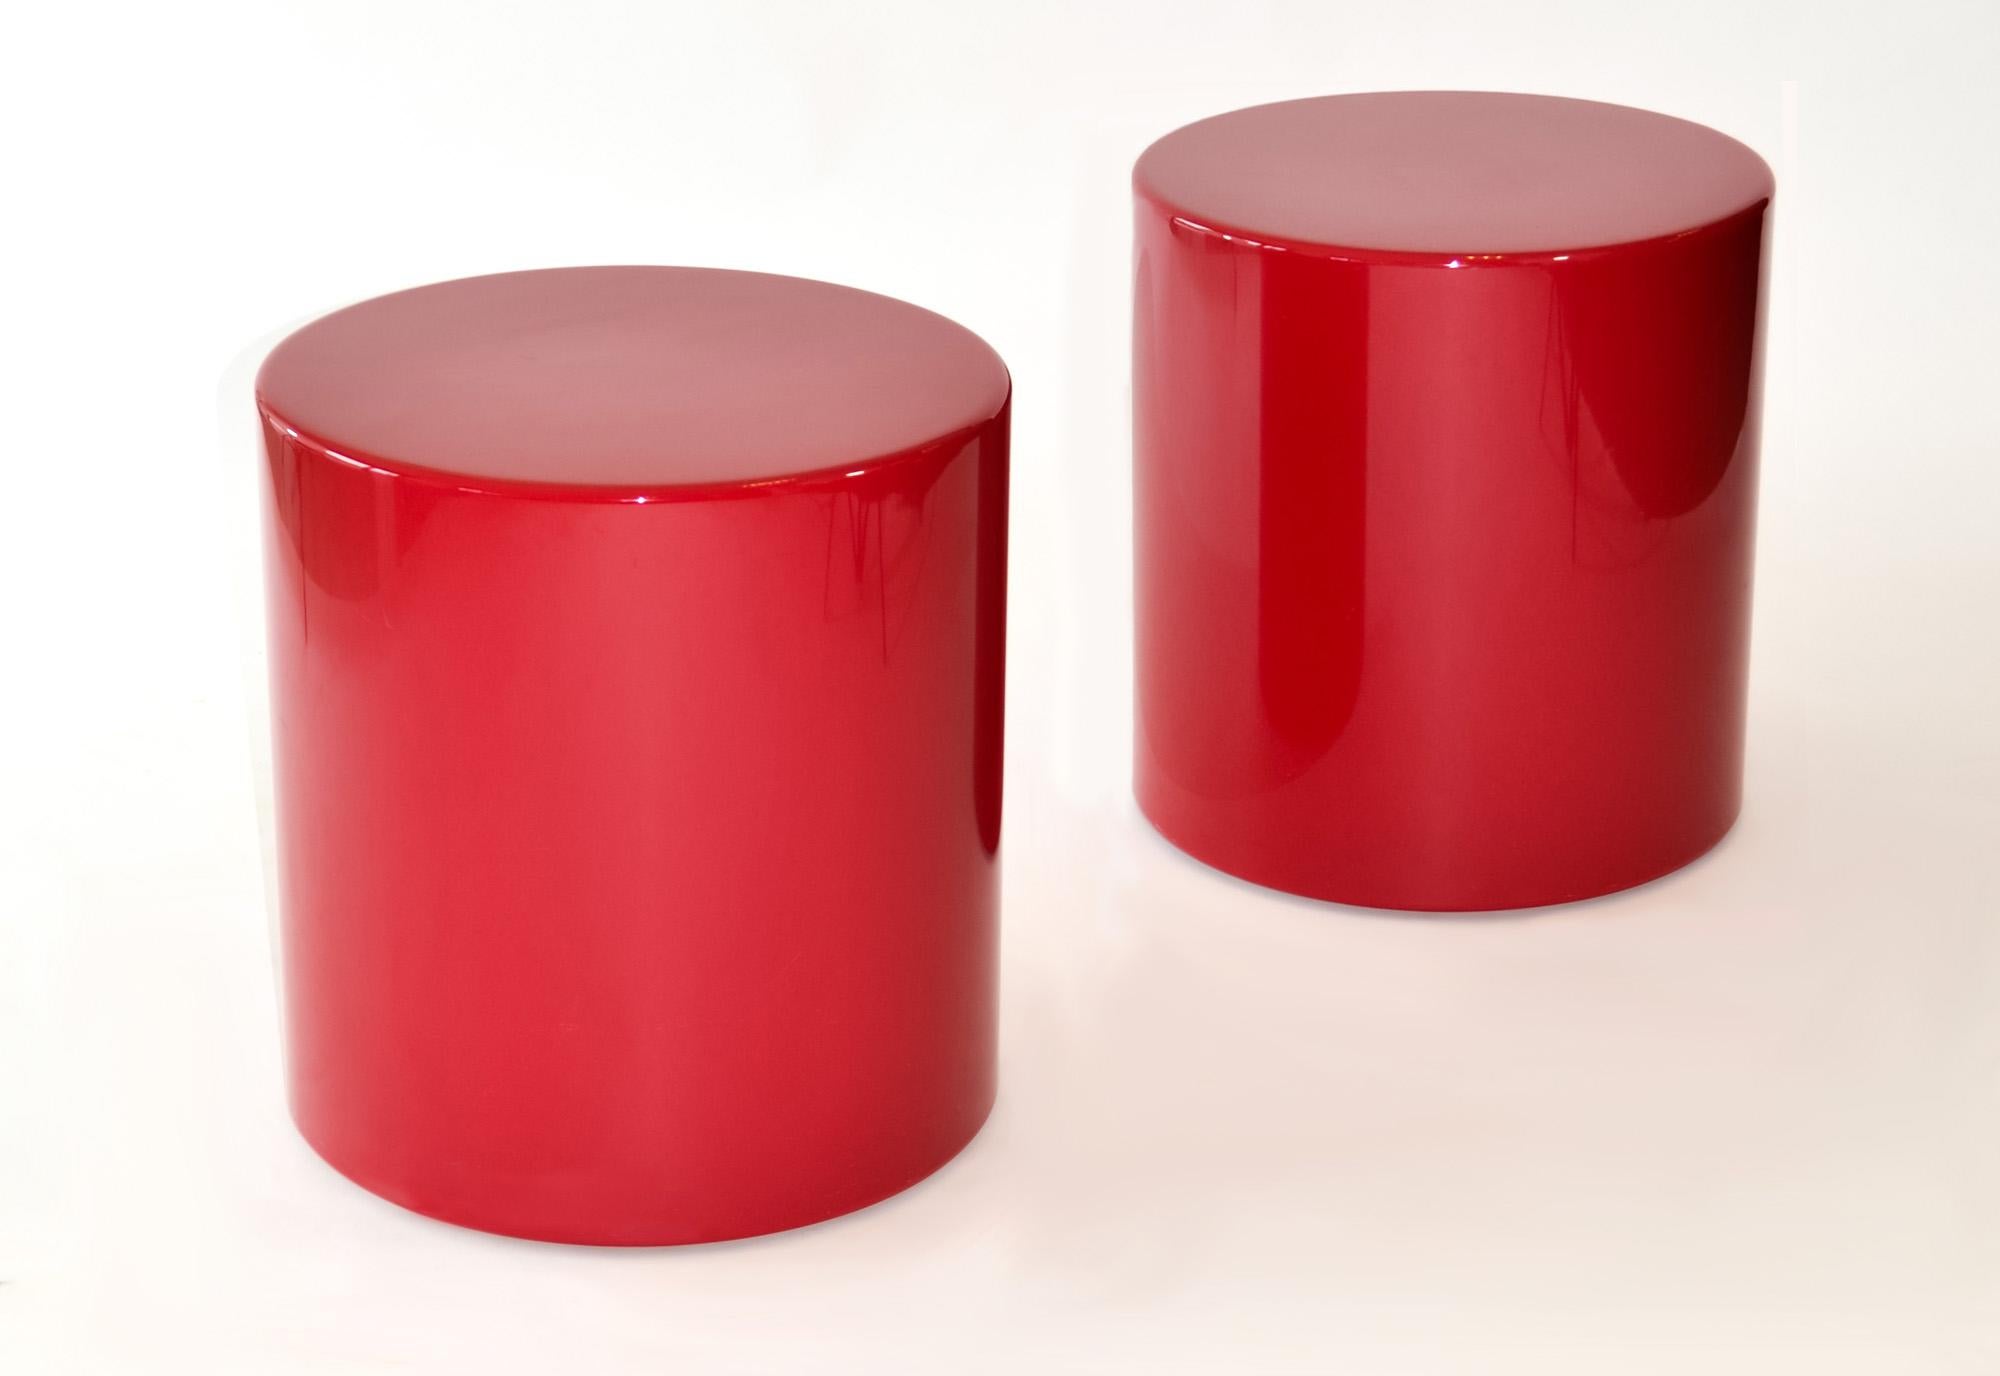 Pair of Post Modern Round Side Tables in Red Lacquer
Geometric End Tables in Memphis style

A versatile pair of 1990's barrel side tables crafted from lacquered wood, featuring a post modern, geometric, and minimalist design. 

Purchased from a